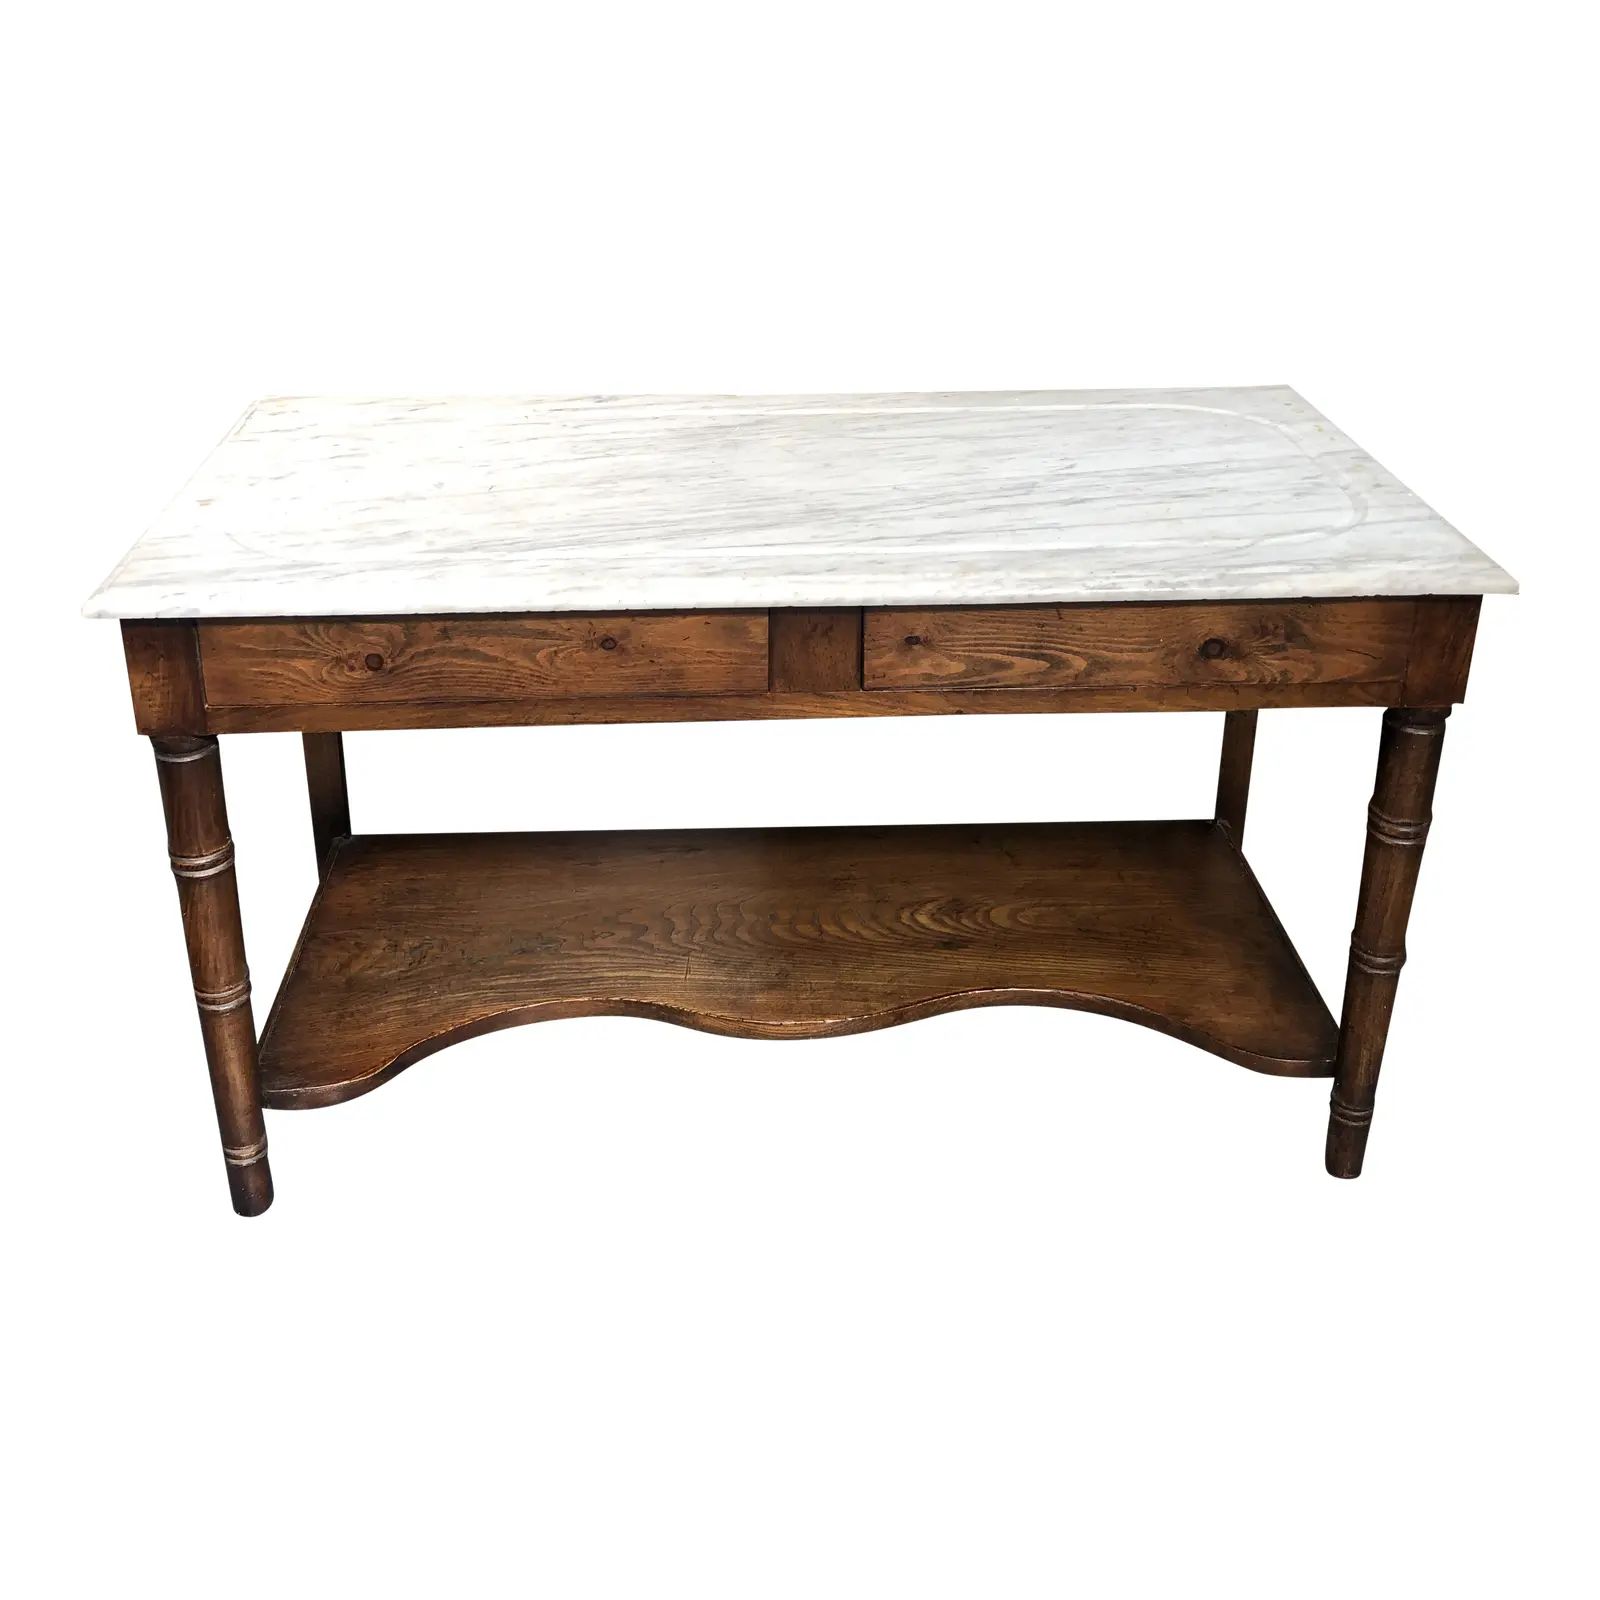 English Traditional Marble Topped Washstand/Console | Chairish